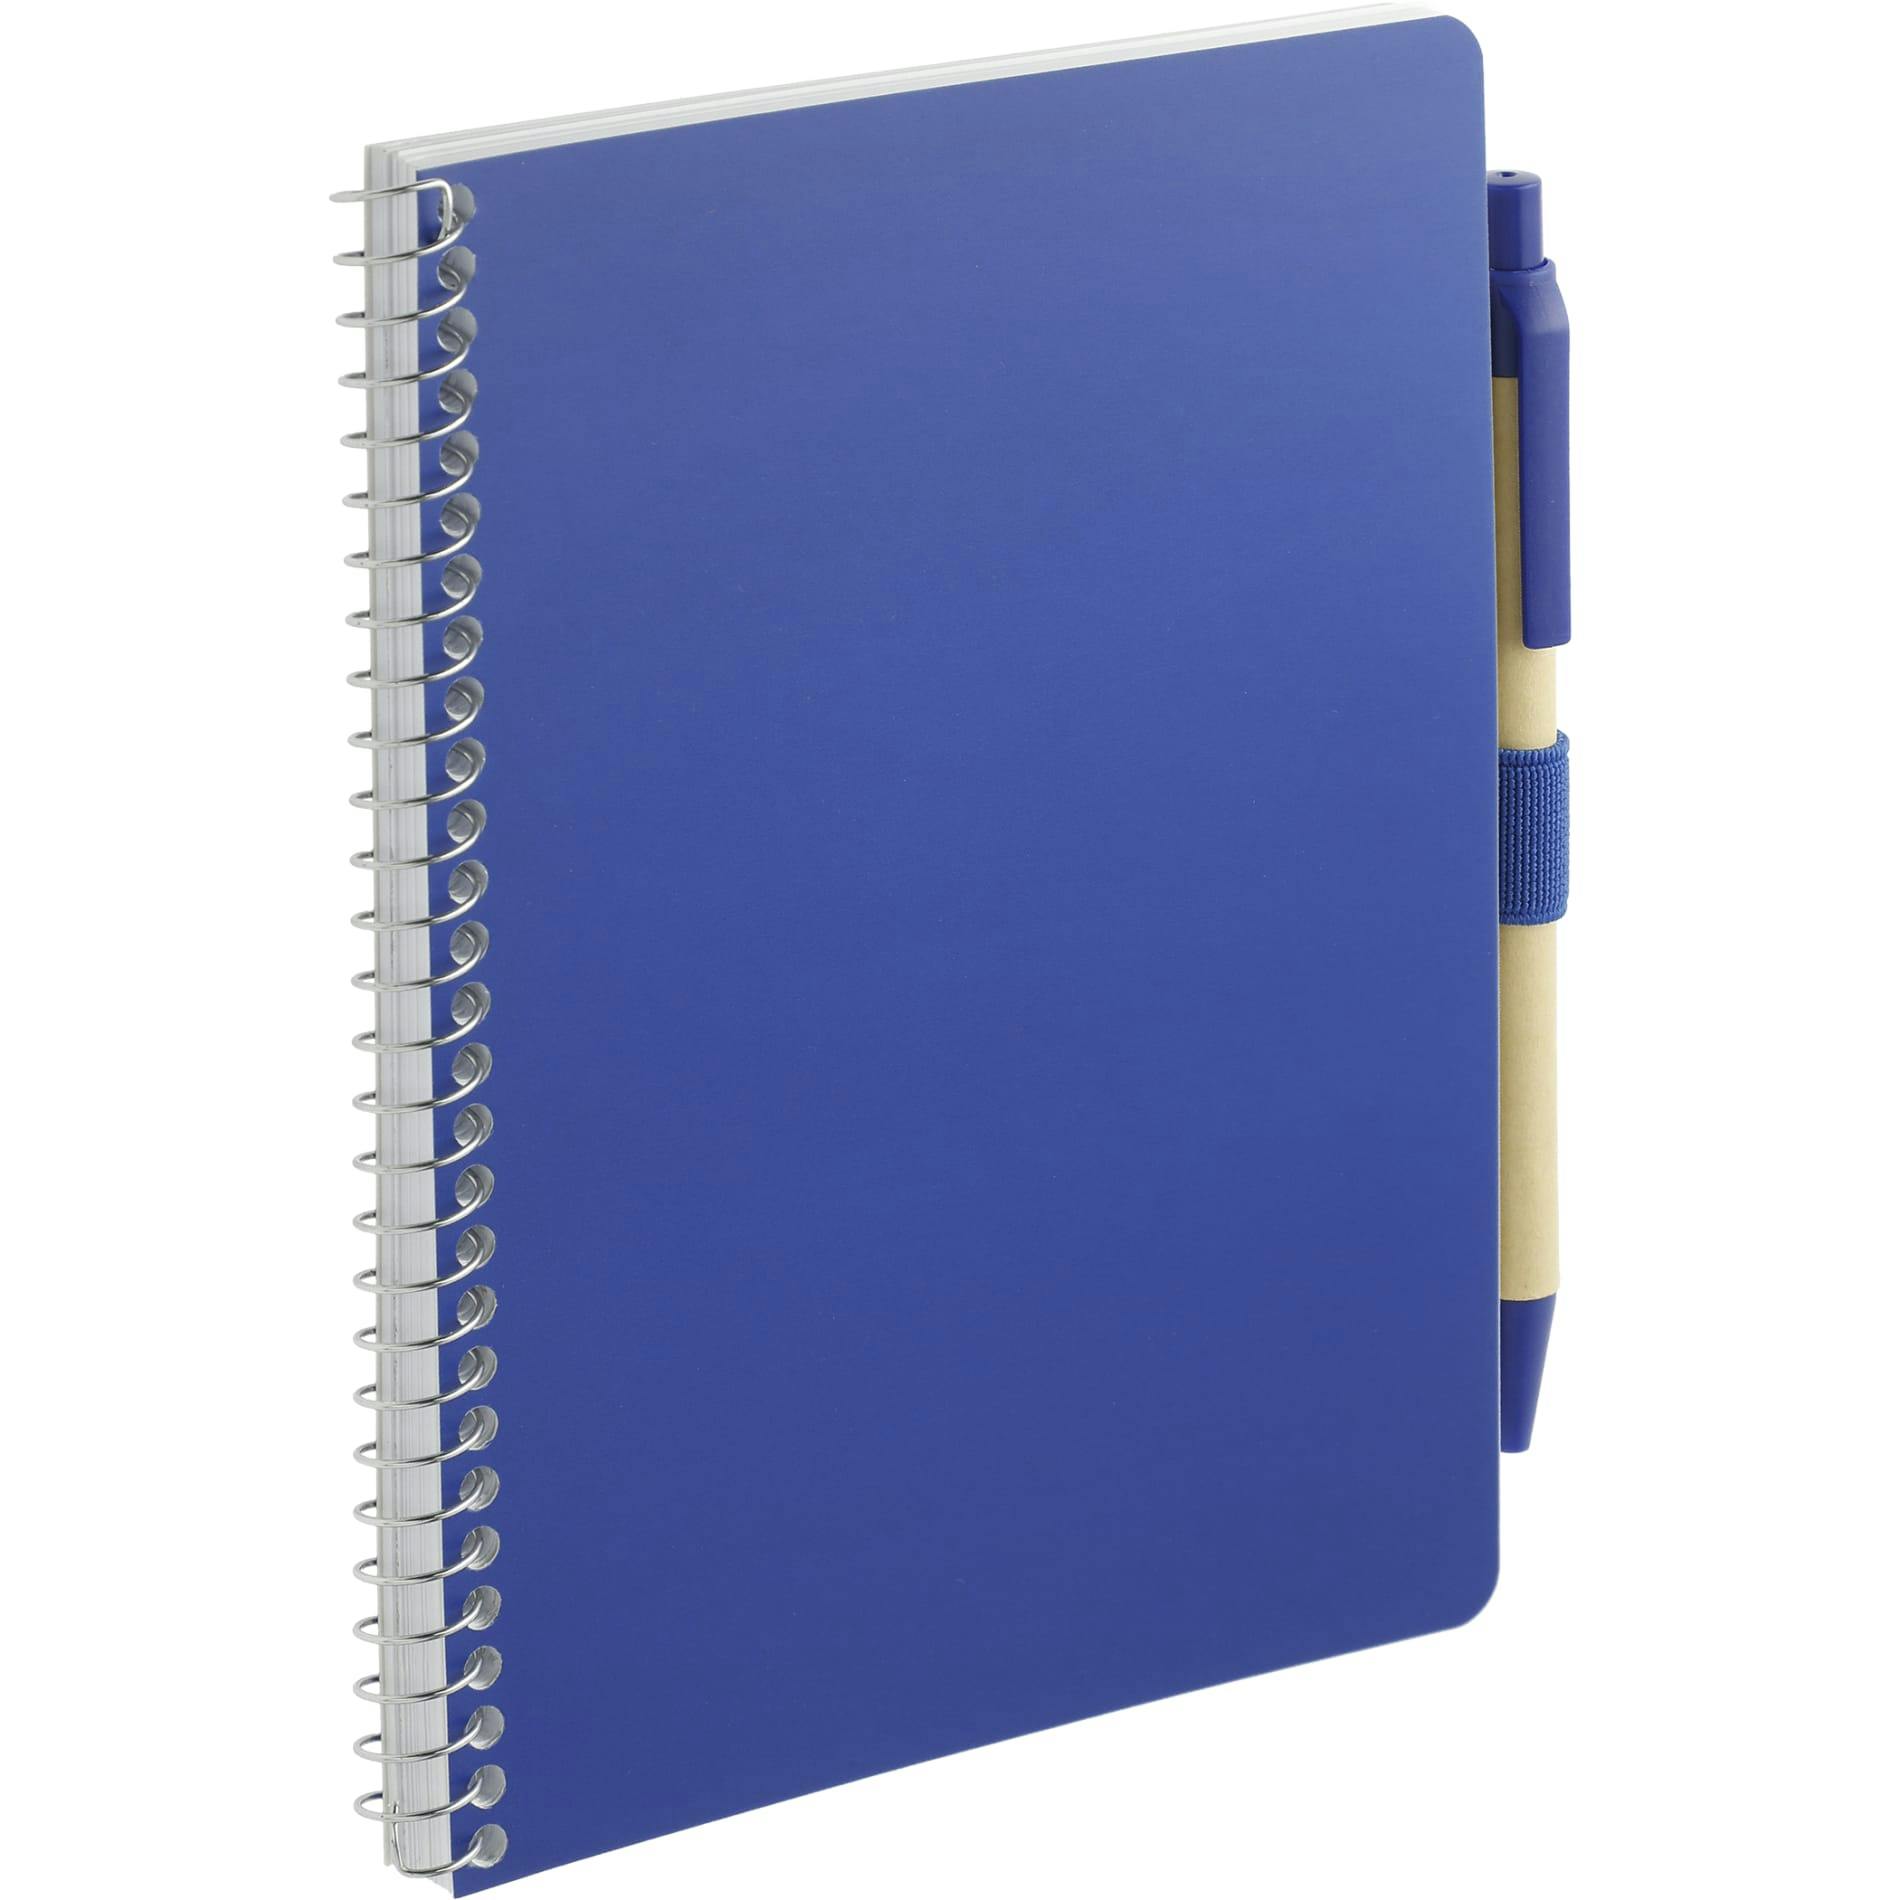 5” x 7” FSC® Mix Spiral Notebook with Pen - additional Image 3